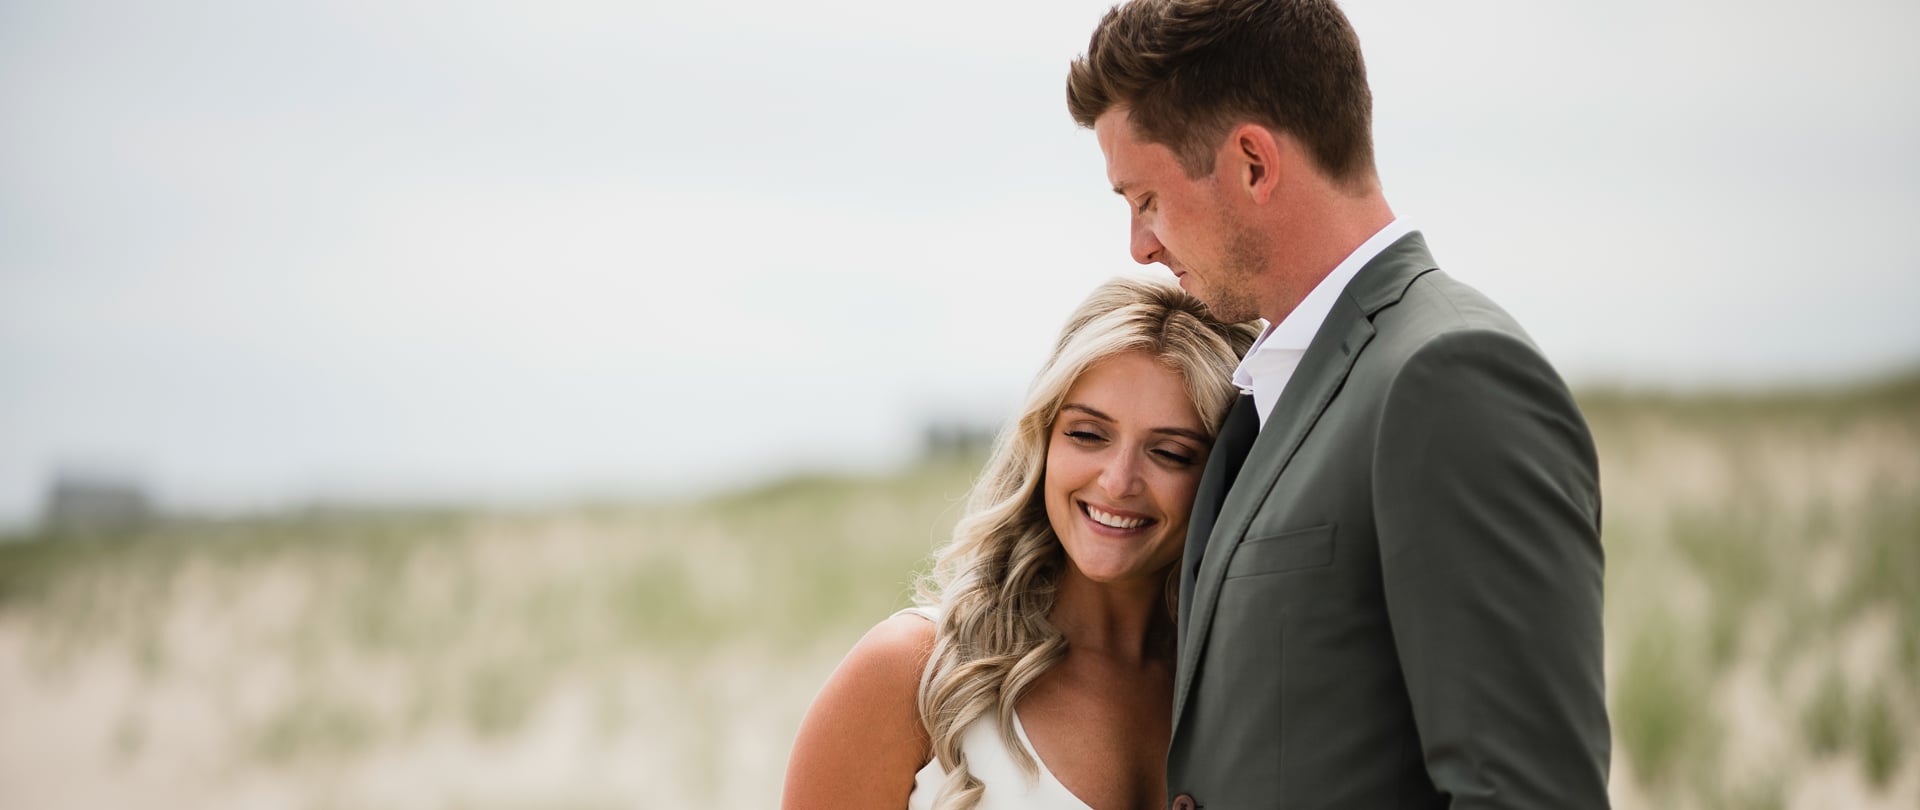 Carly & J.D Wedding Video Filmed at New York, United States